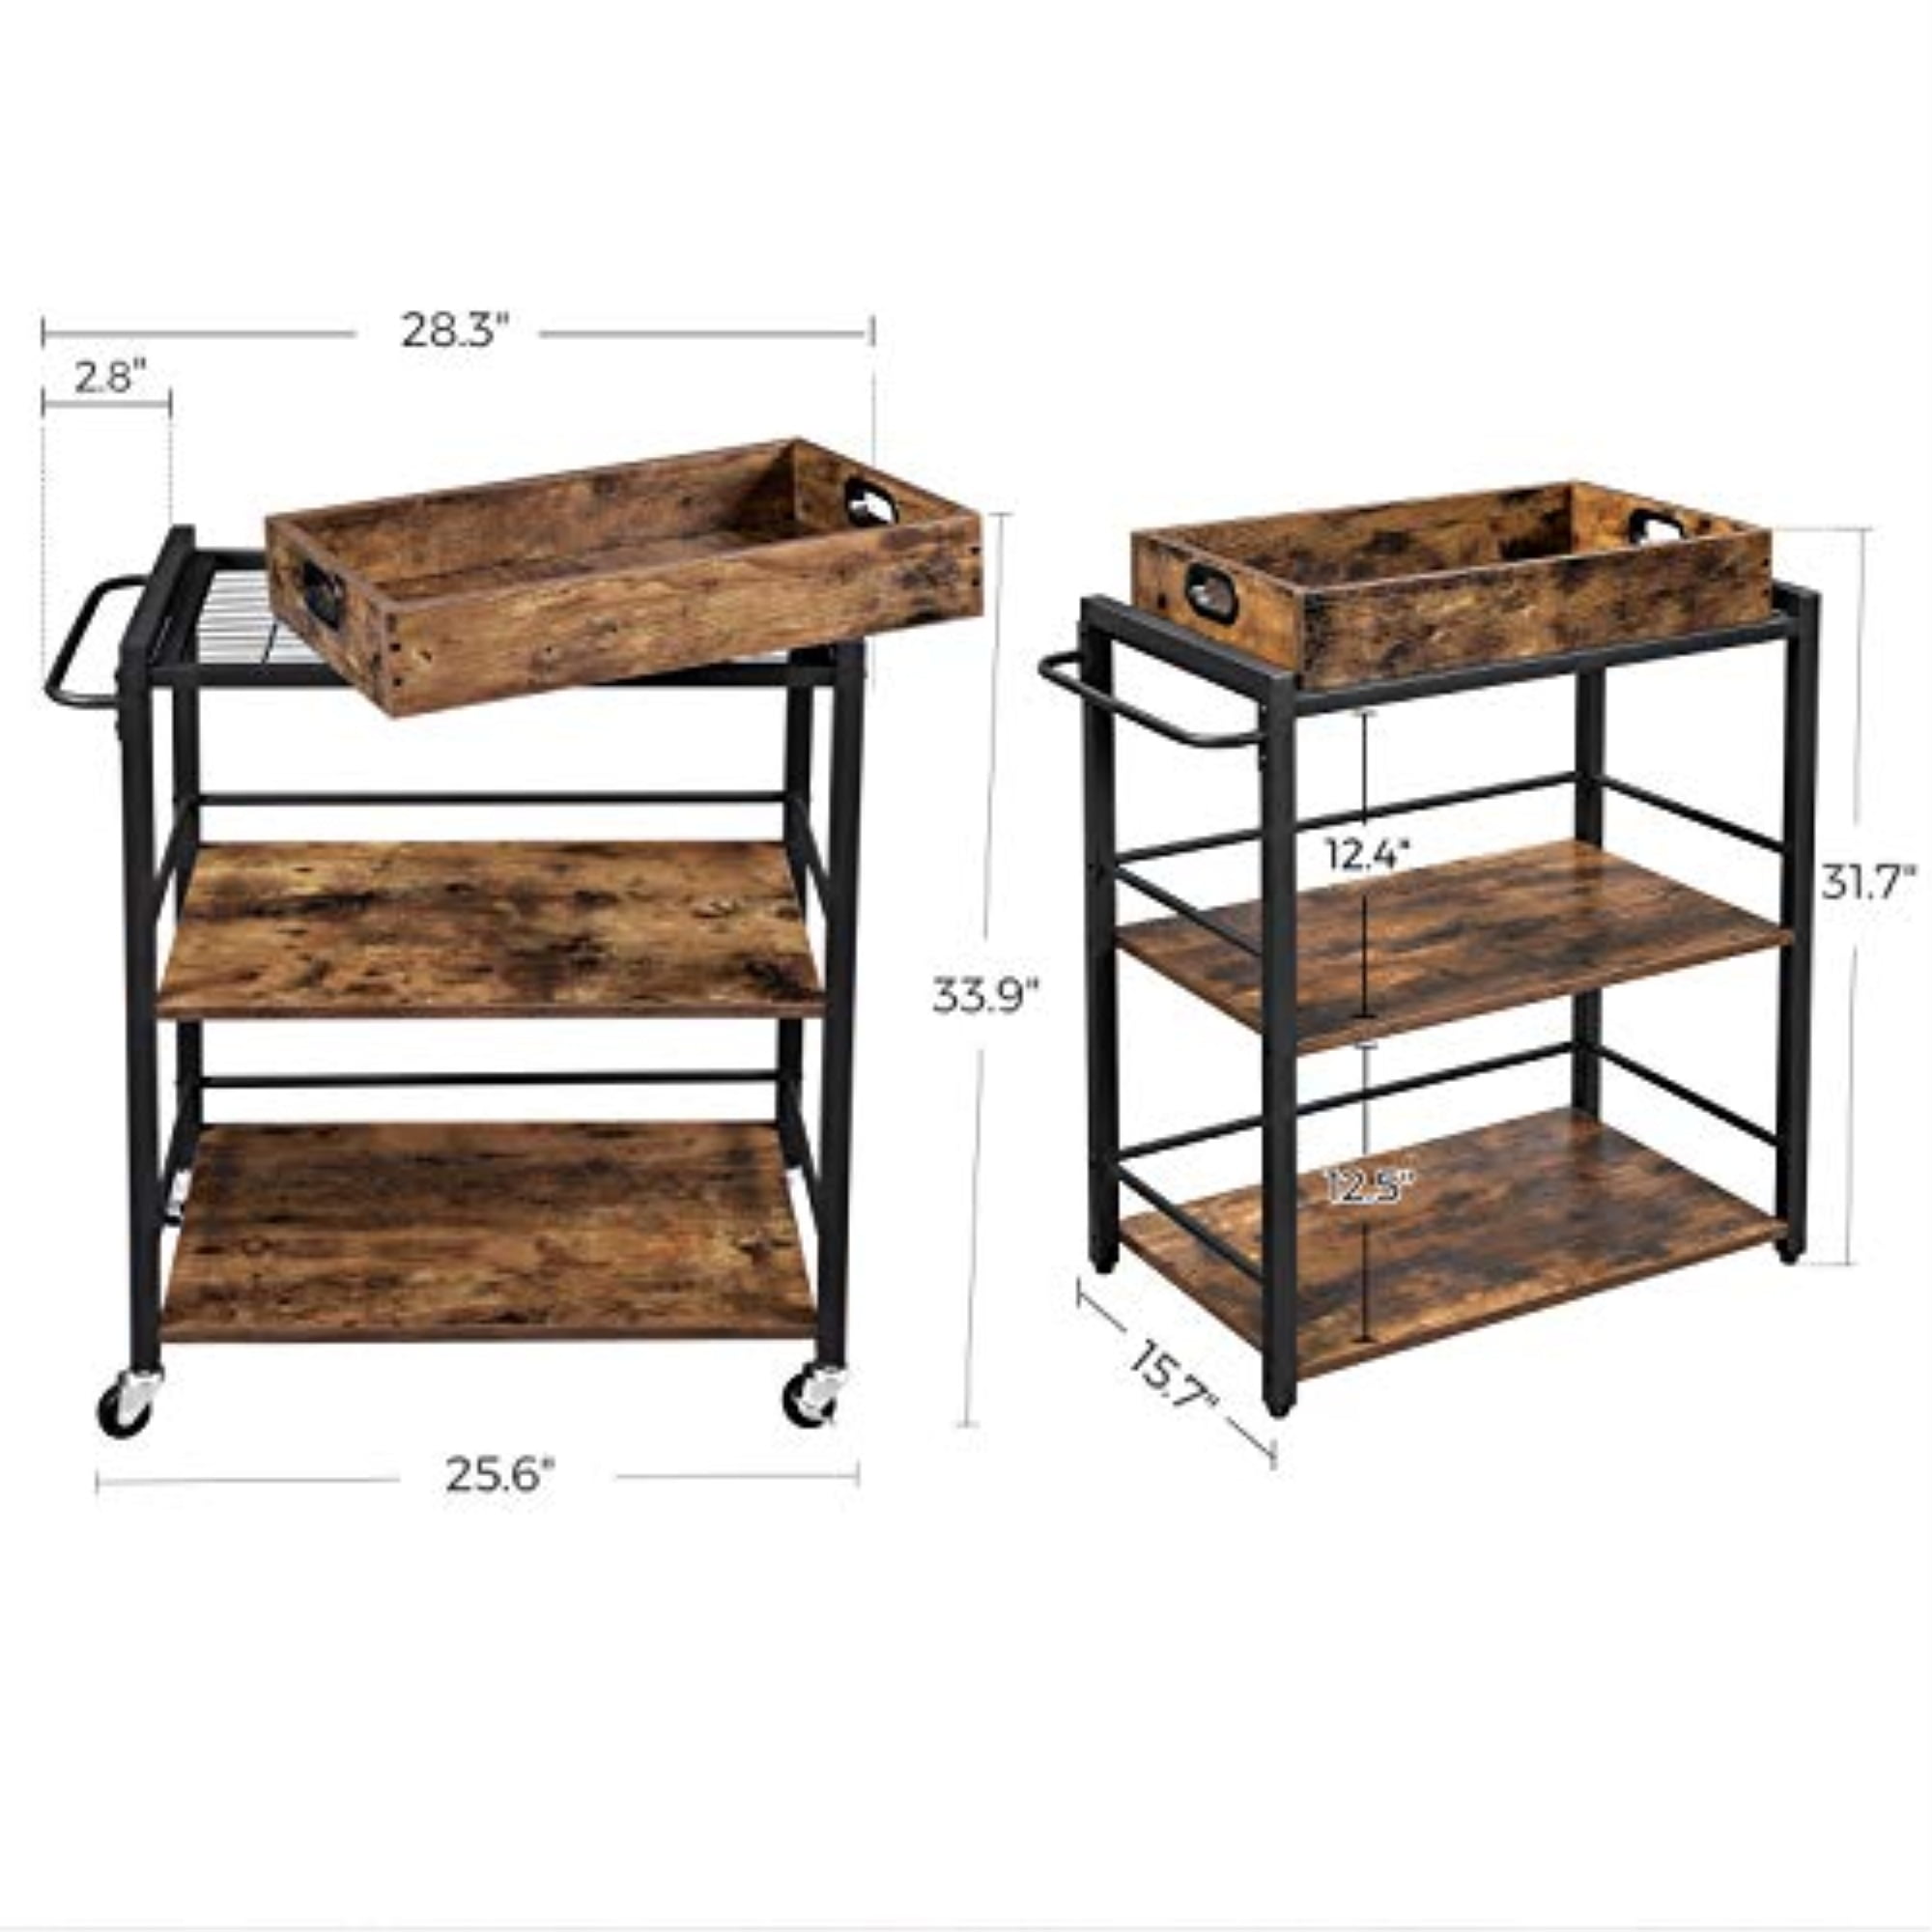 Rustic Brown ULRC72X Universal Casters with Brakes 3-Tier Kitchen Utility Cart on Wheels with Storage VASAGLE ALINRU Kitchen Serving Cart with Removable Tray Leveling Feet